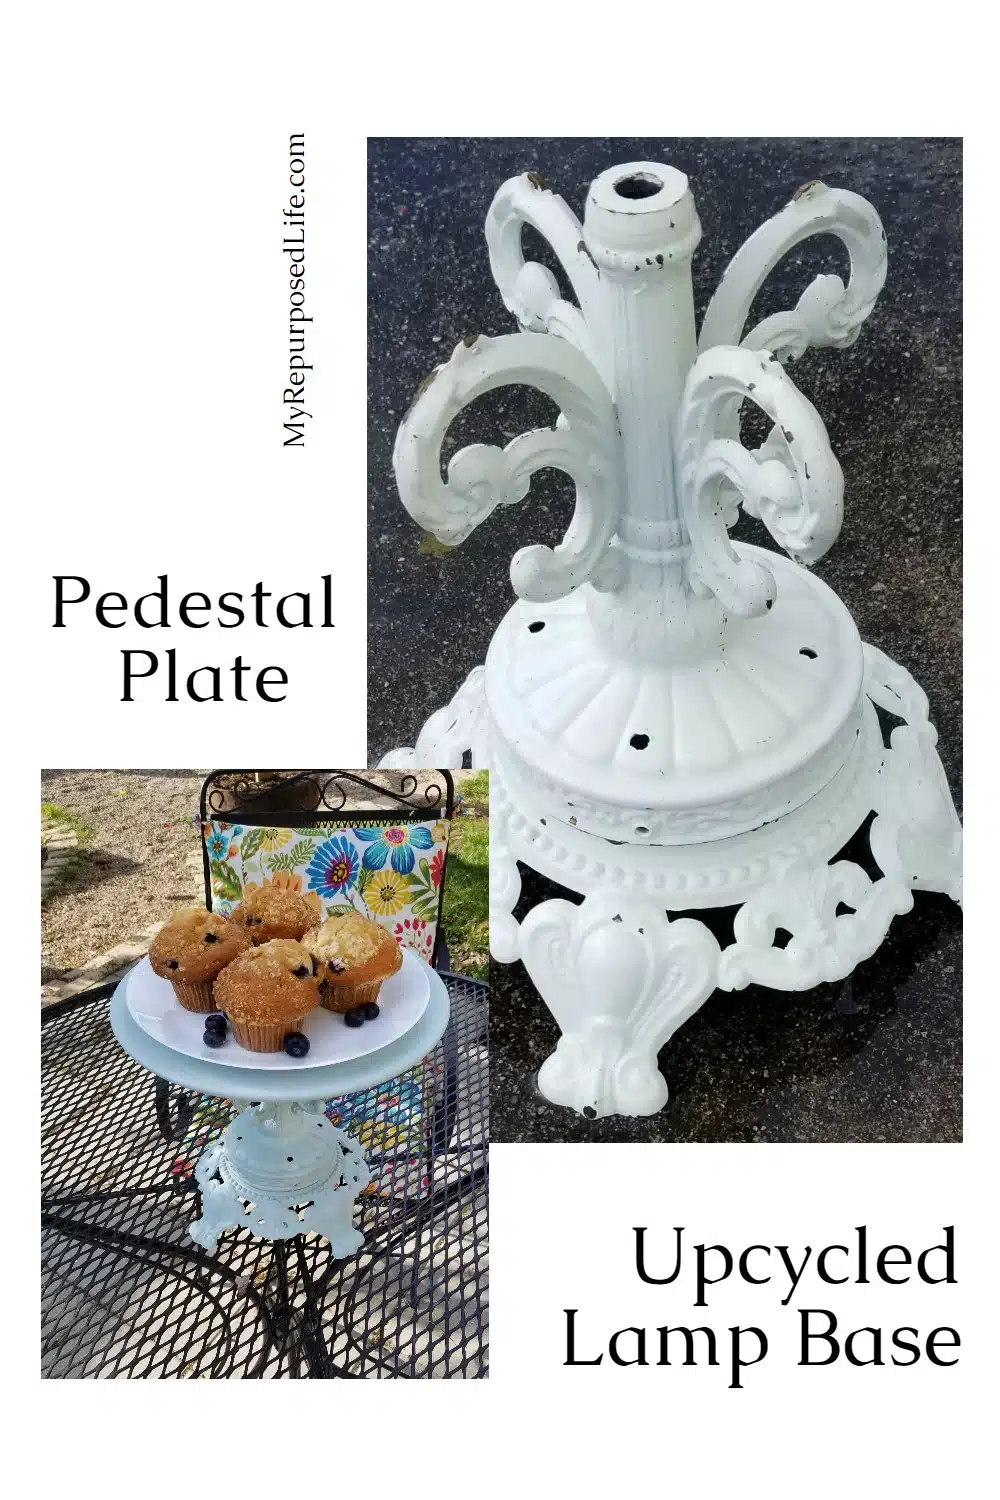 Using a former lamp base and a wooden platter, this easy project came together very quickly. Chalk spray paint made it match and look like it was always this way. Add a dinner plate, or use it without it. Either way, it's so pretty and handy. #MyRepurposedLife #repurposed #lamp #base #pedestal #platter via @repurposedlife